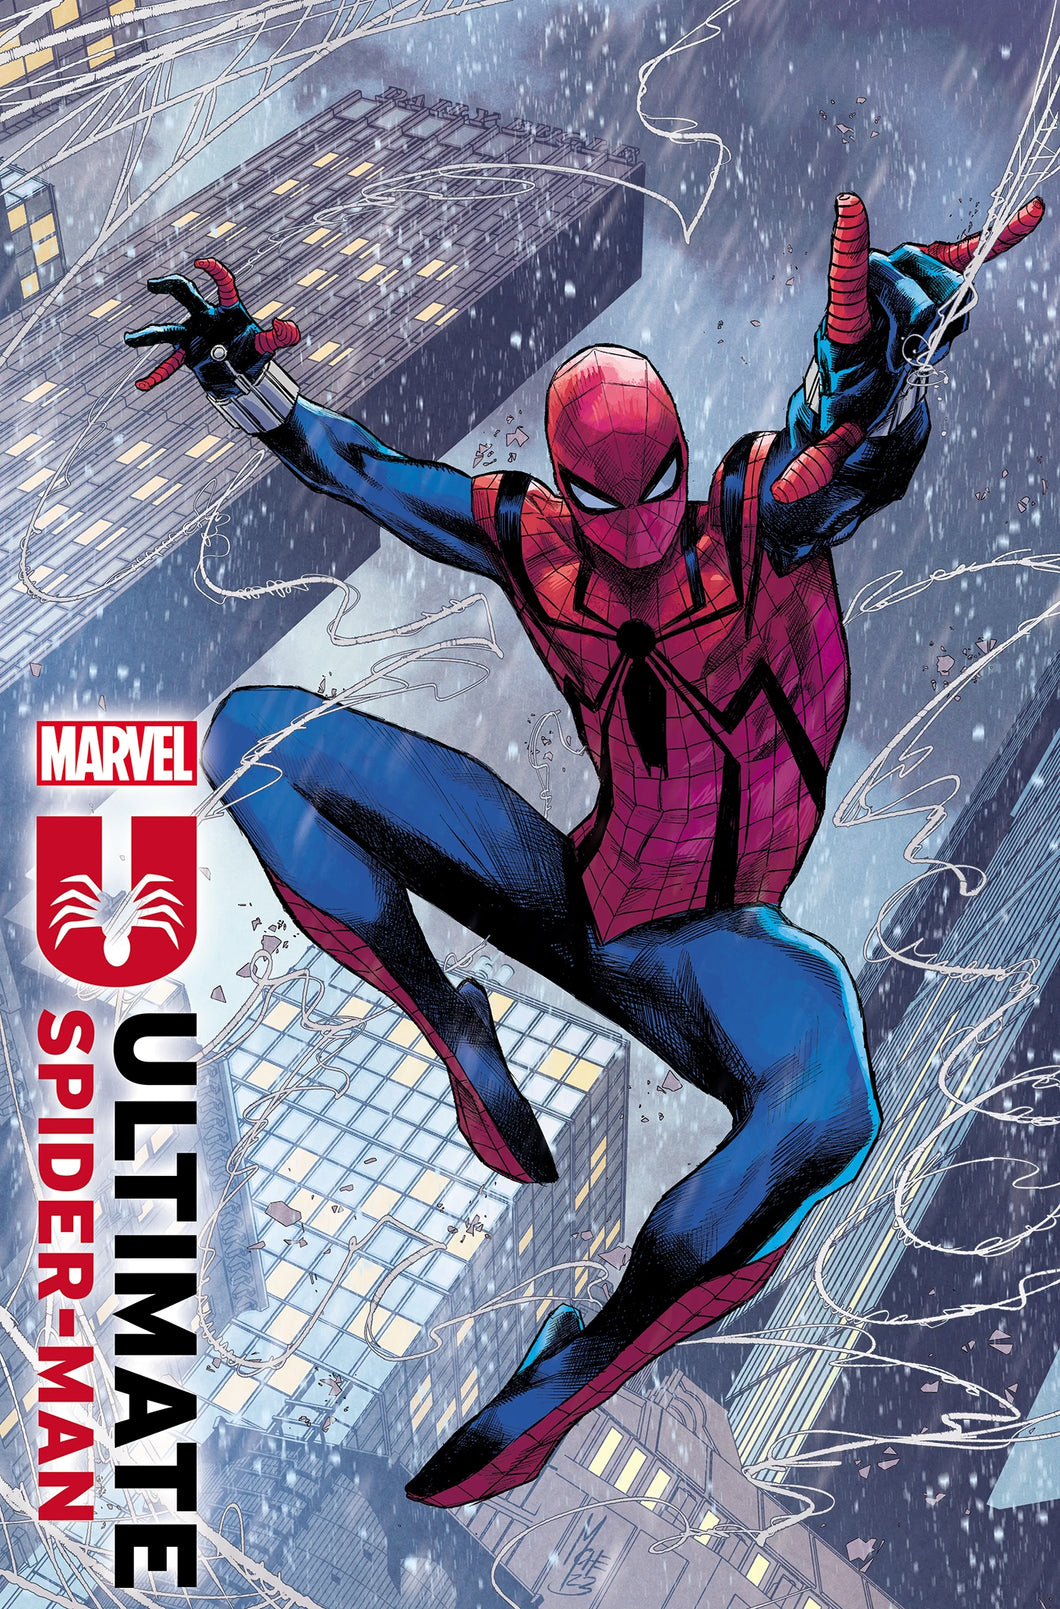 EXCLUSIVE Marvel Preview: Ultimate Spider-Man #1 • AIPT